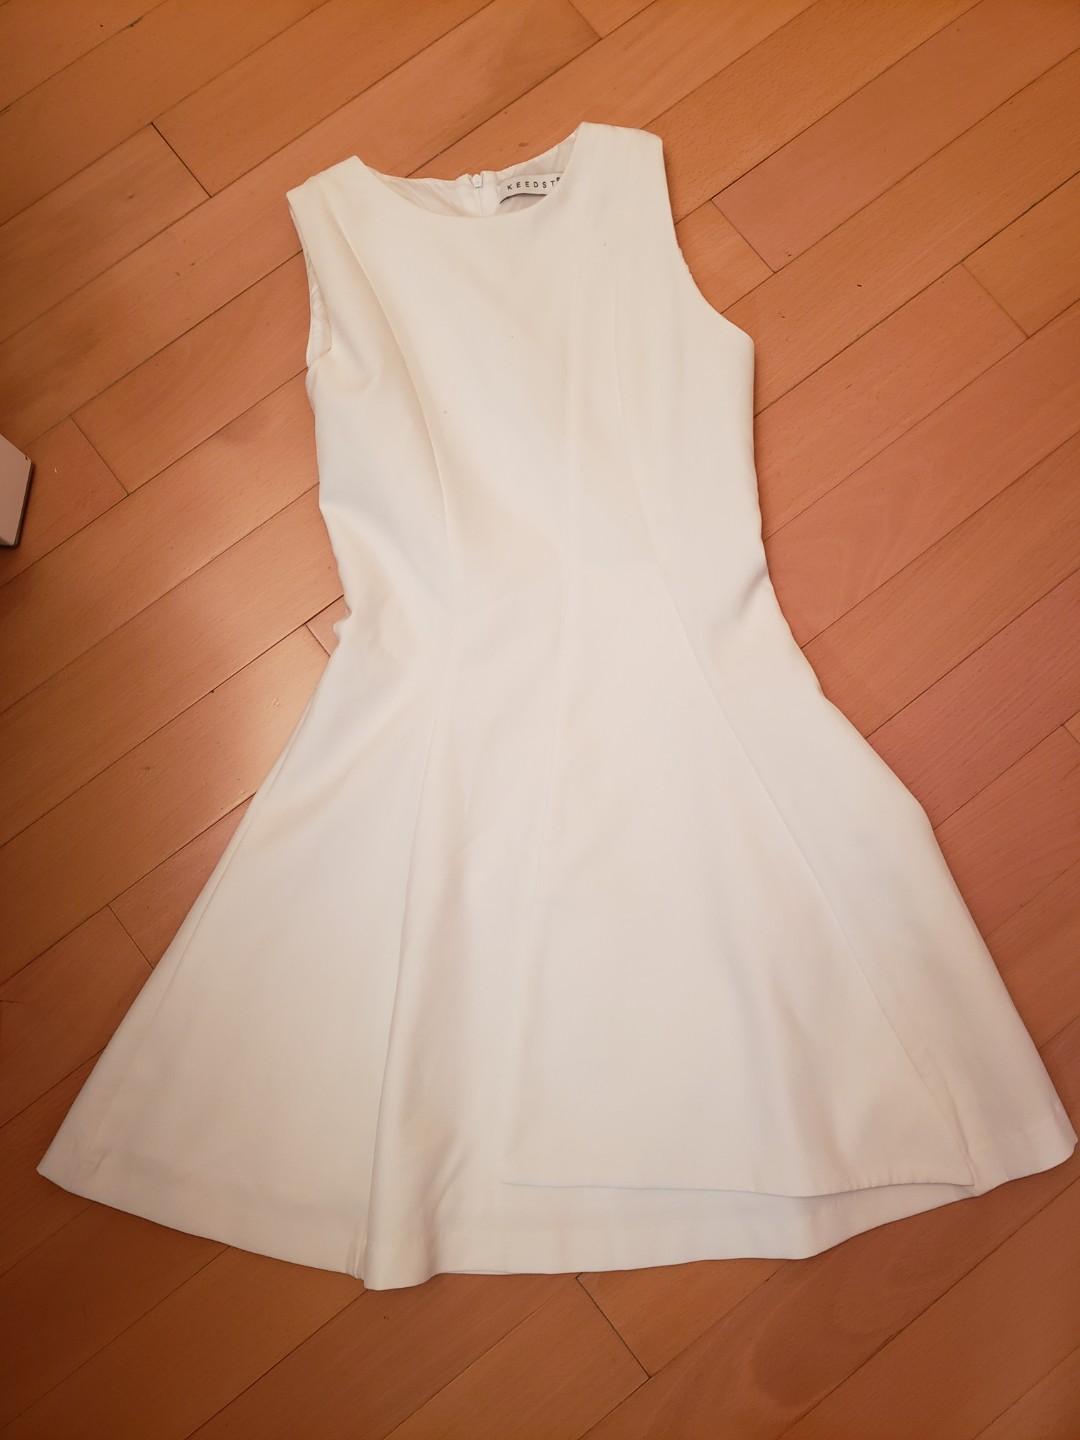 looking for a white dress